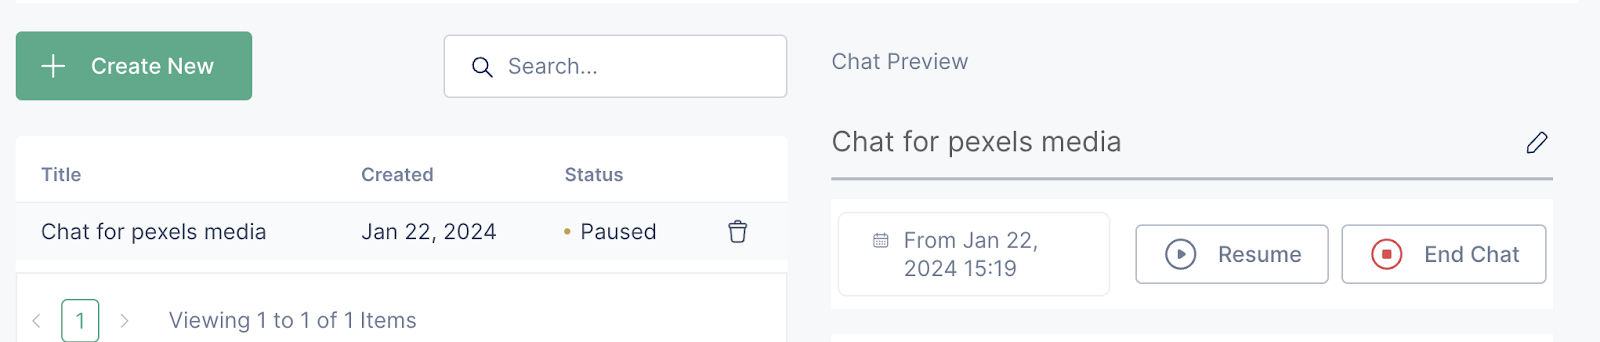 chat engagements 4